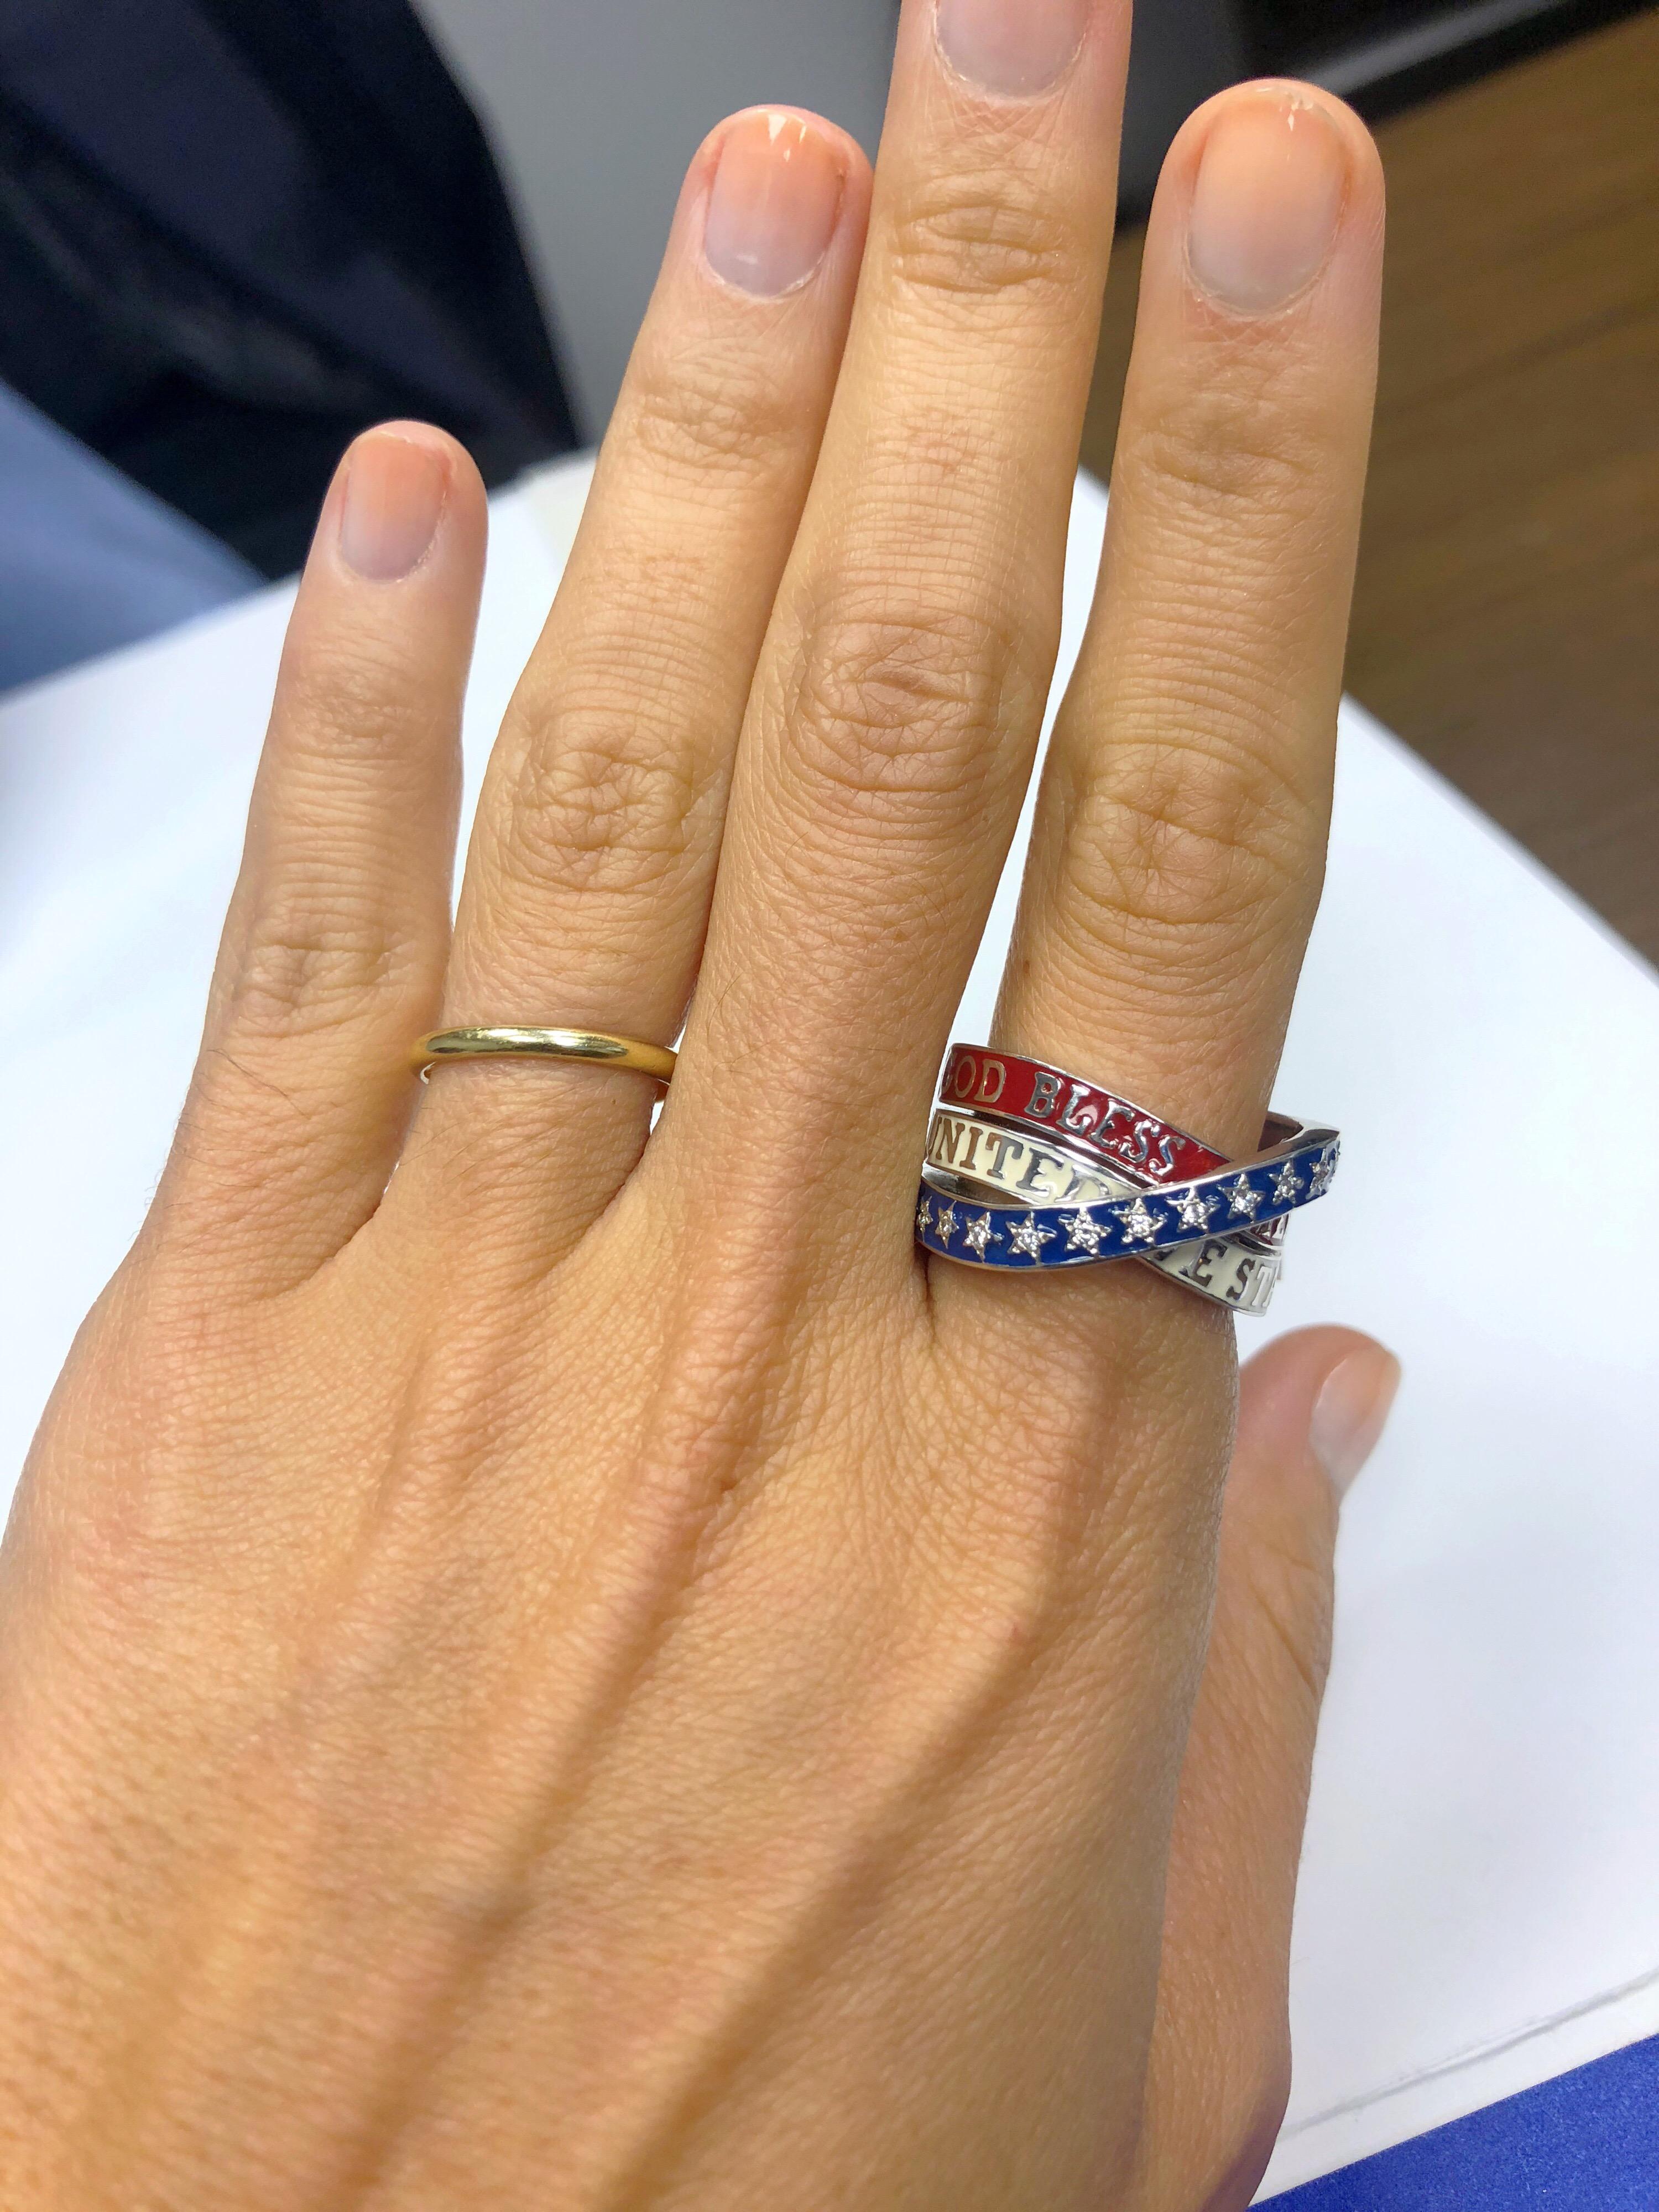 The all American Tribute ring , created exclusively for Cellini. This 3 band crossover ring is crafted  in 18 karat gold with red, white, and blue enamel. God Bless America, United We Stand is applied in white gold letters on the red and white